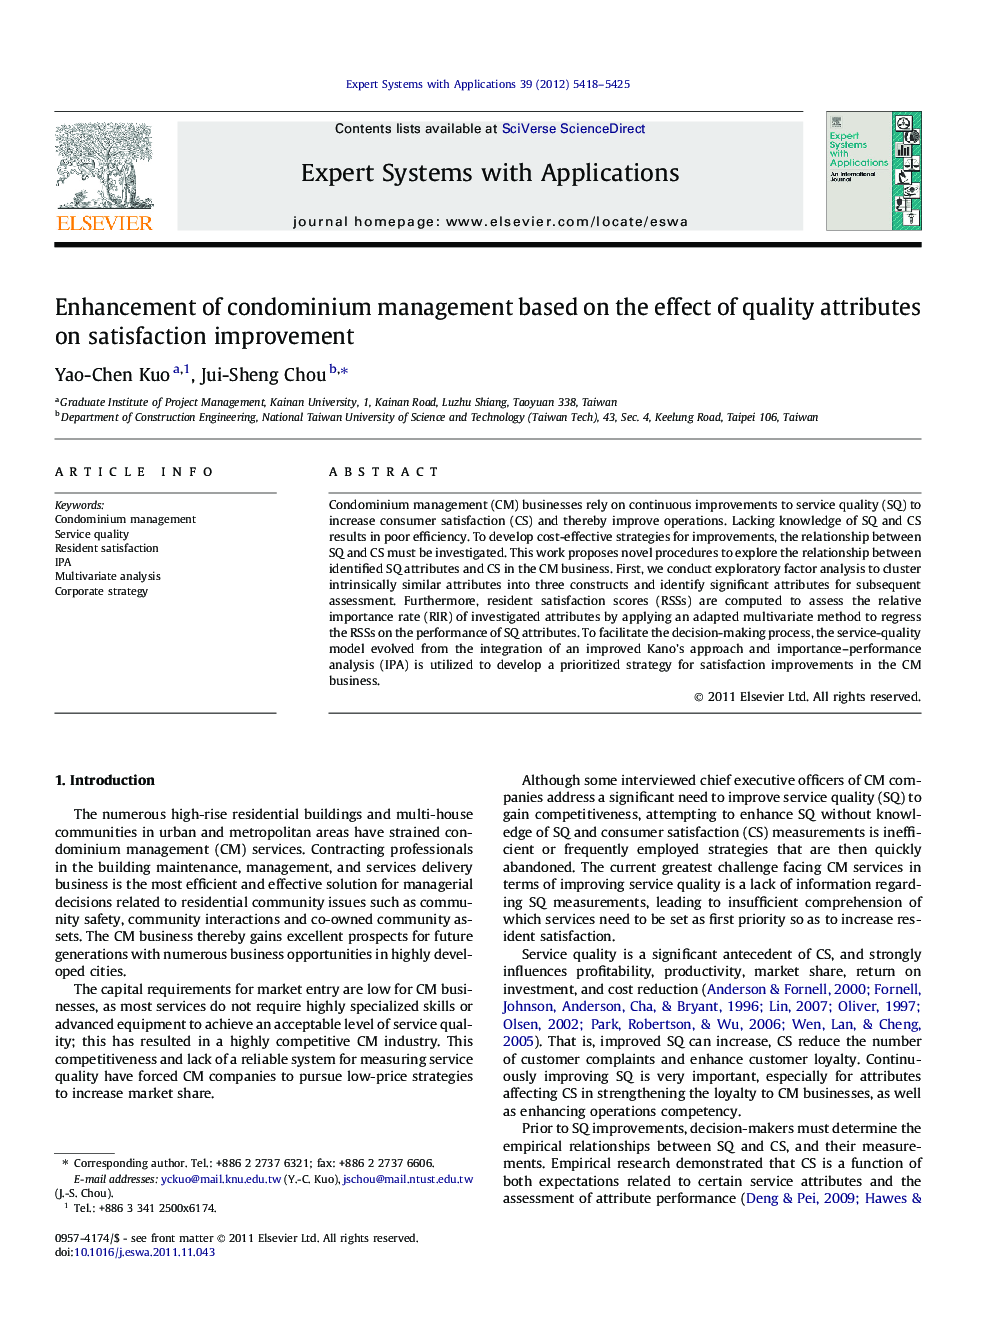 Enhancement of condominium management based on the effect of quality attributes on satisfaction improvement